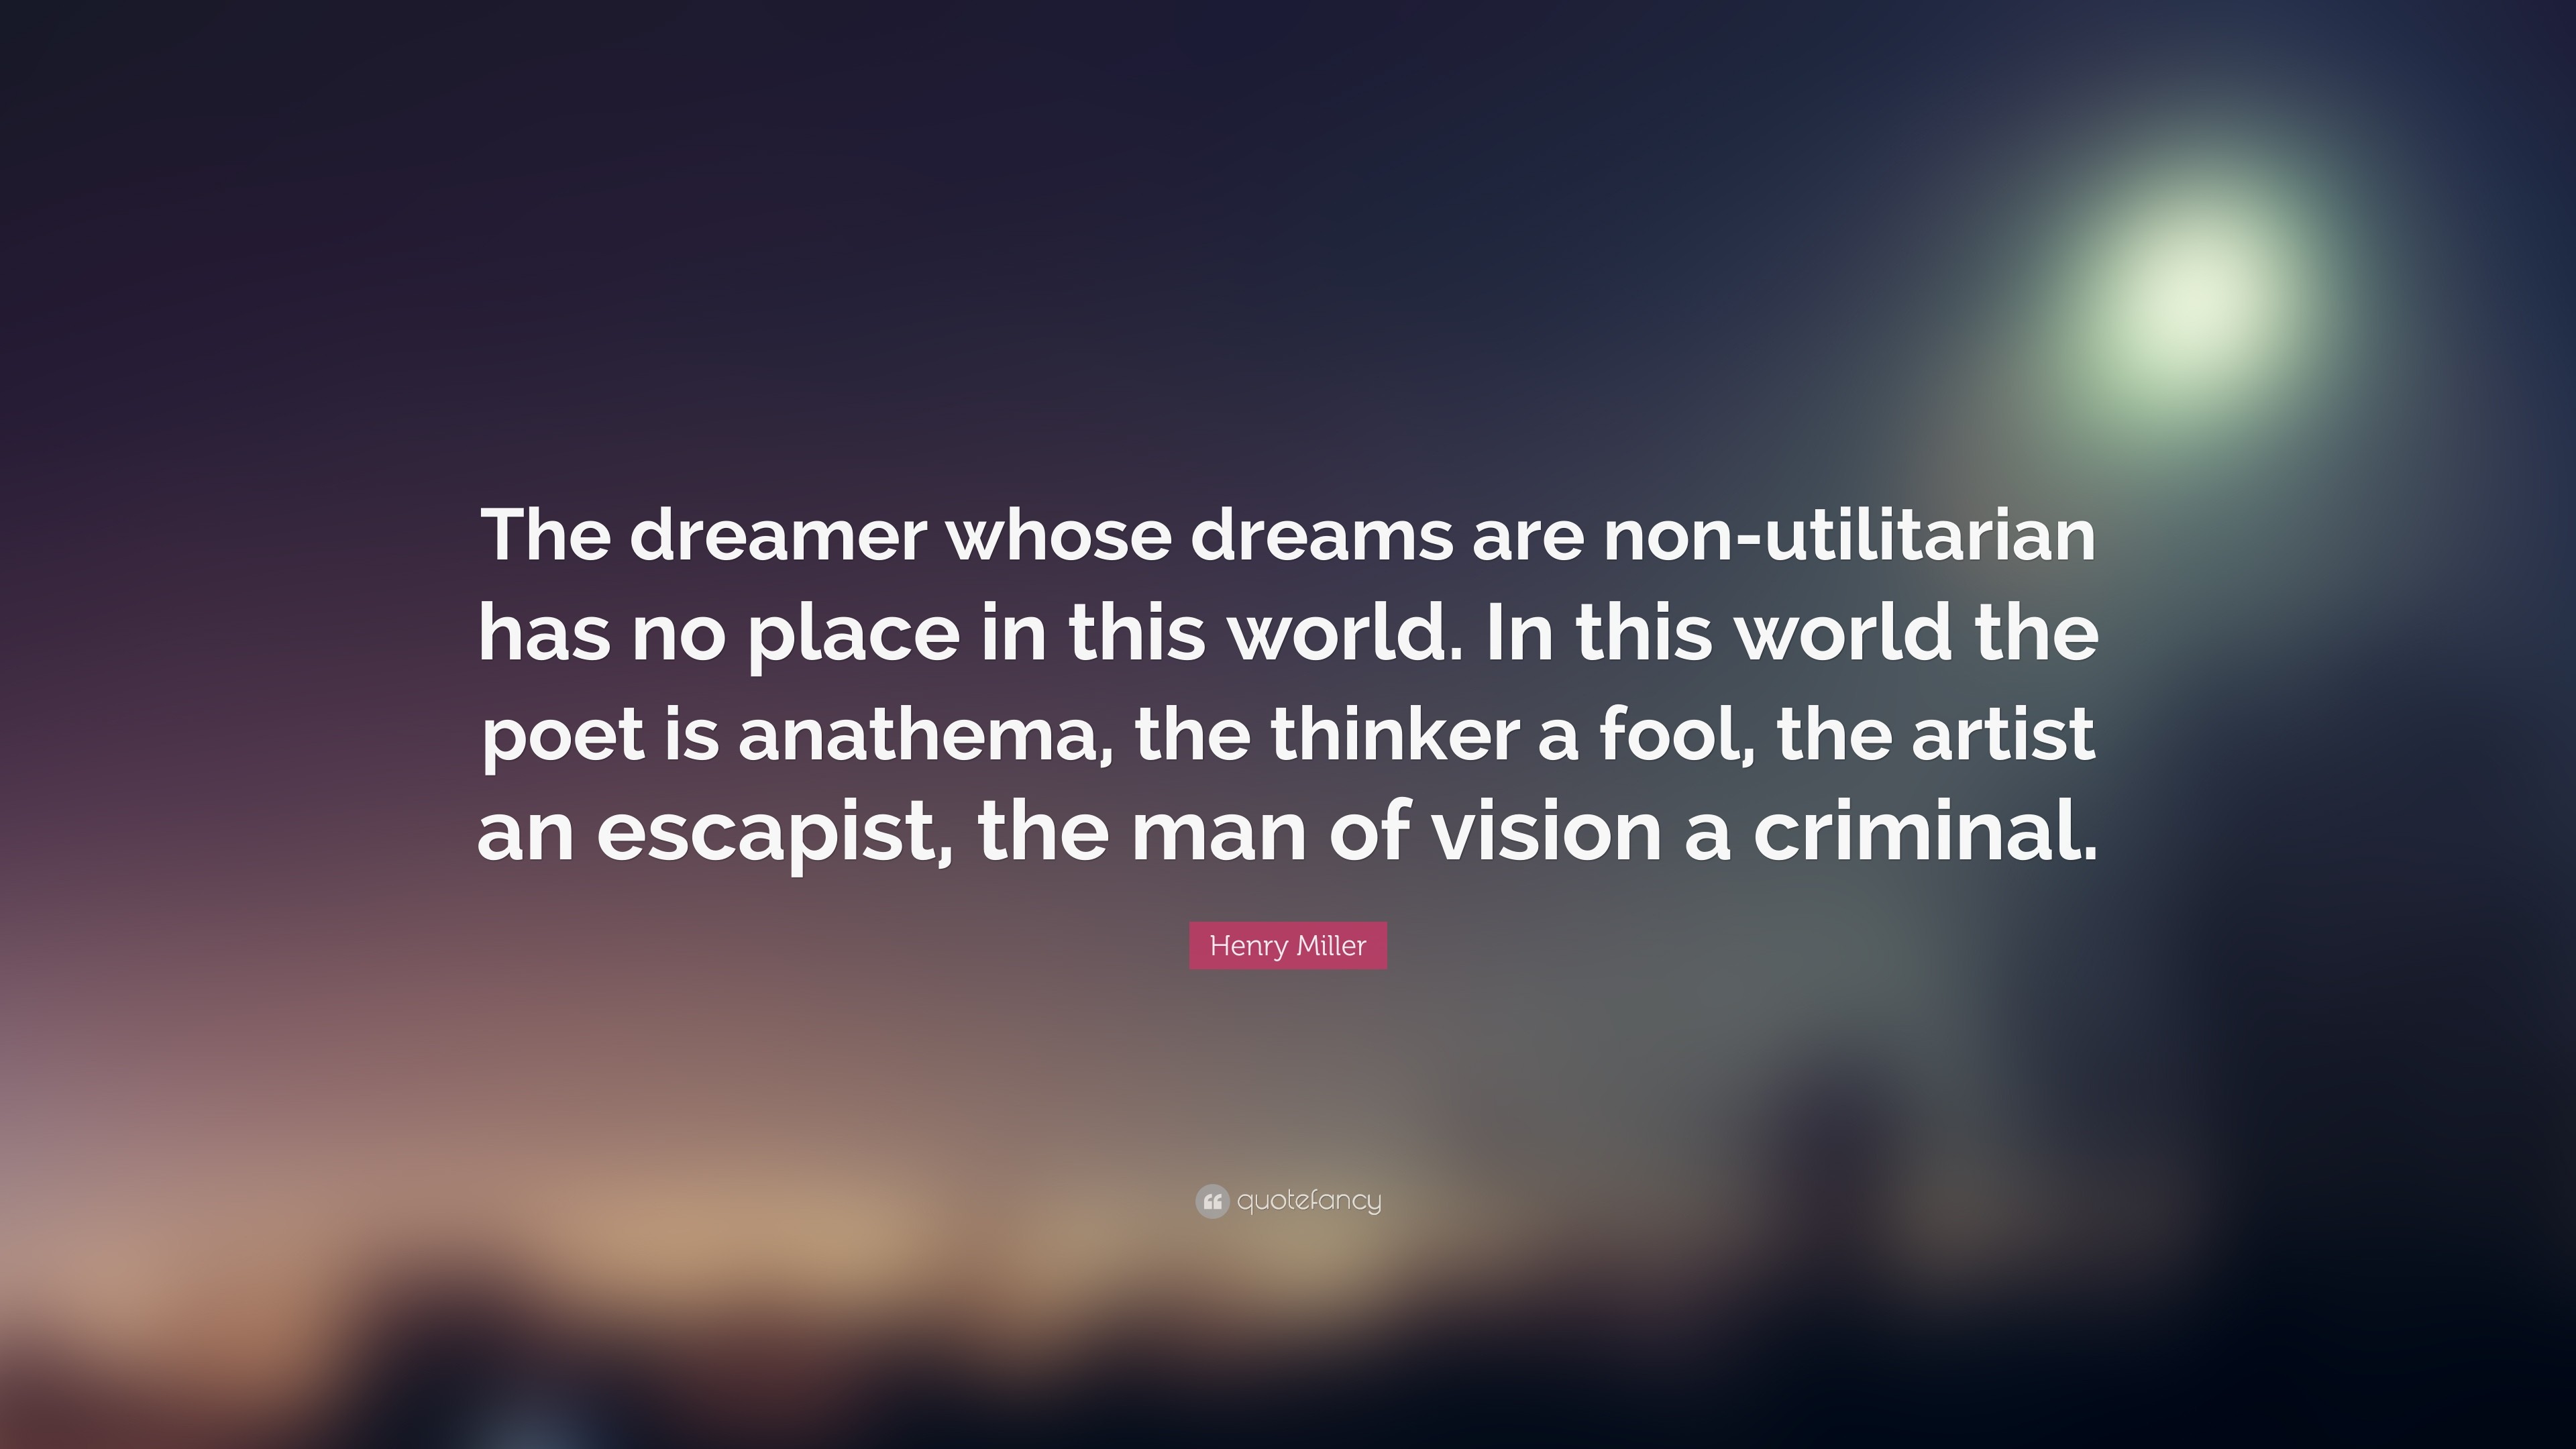 3840x2160 Henry Miller Quote: “The dreamer whose dreams are non-utilitarian has no  place